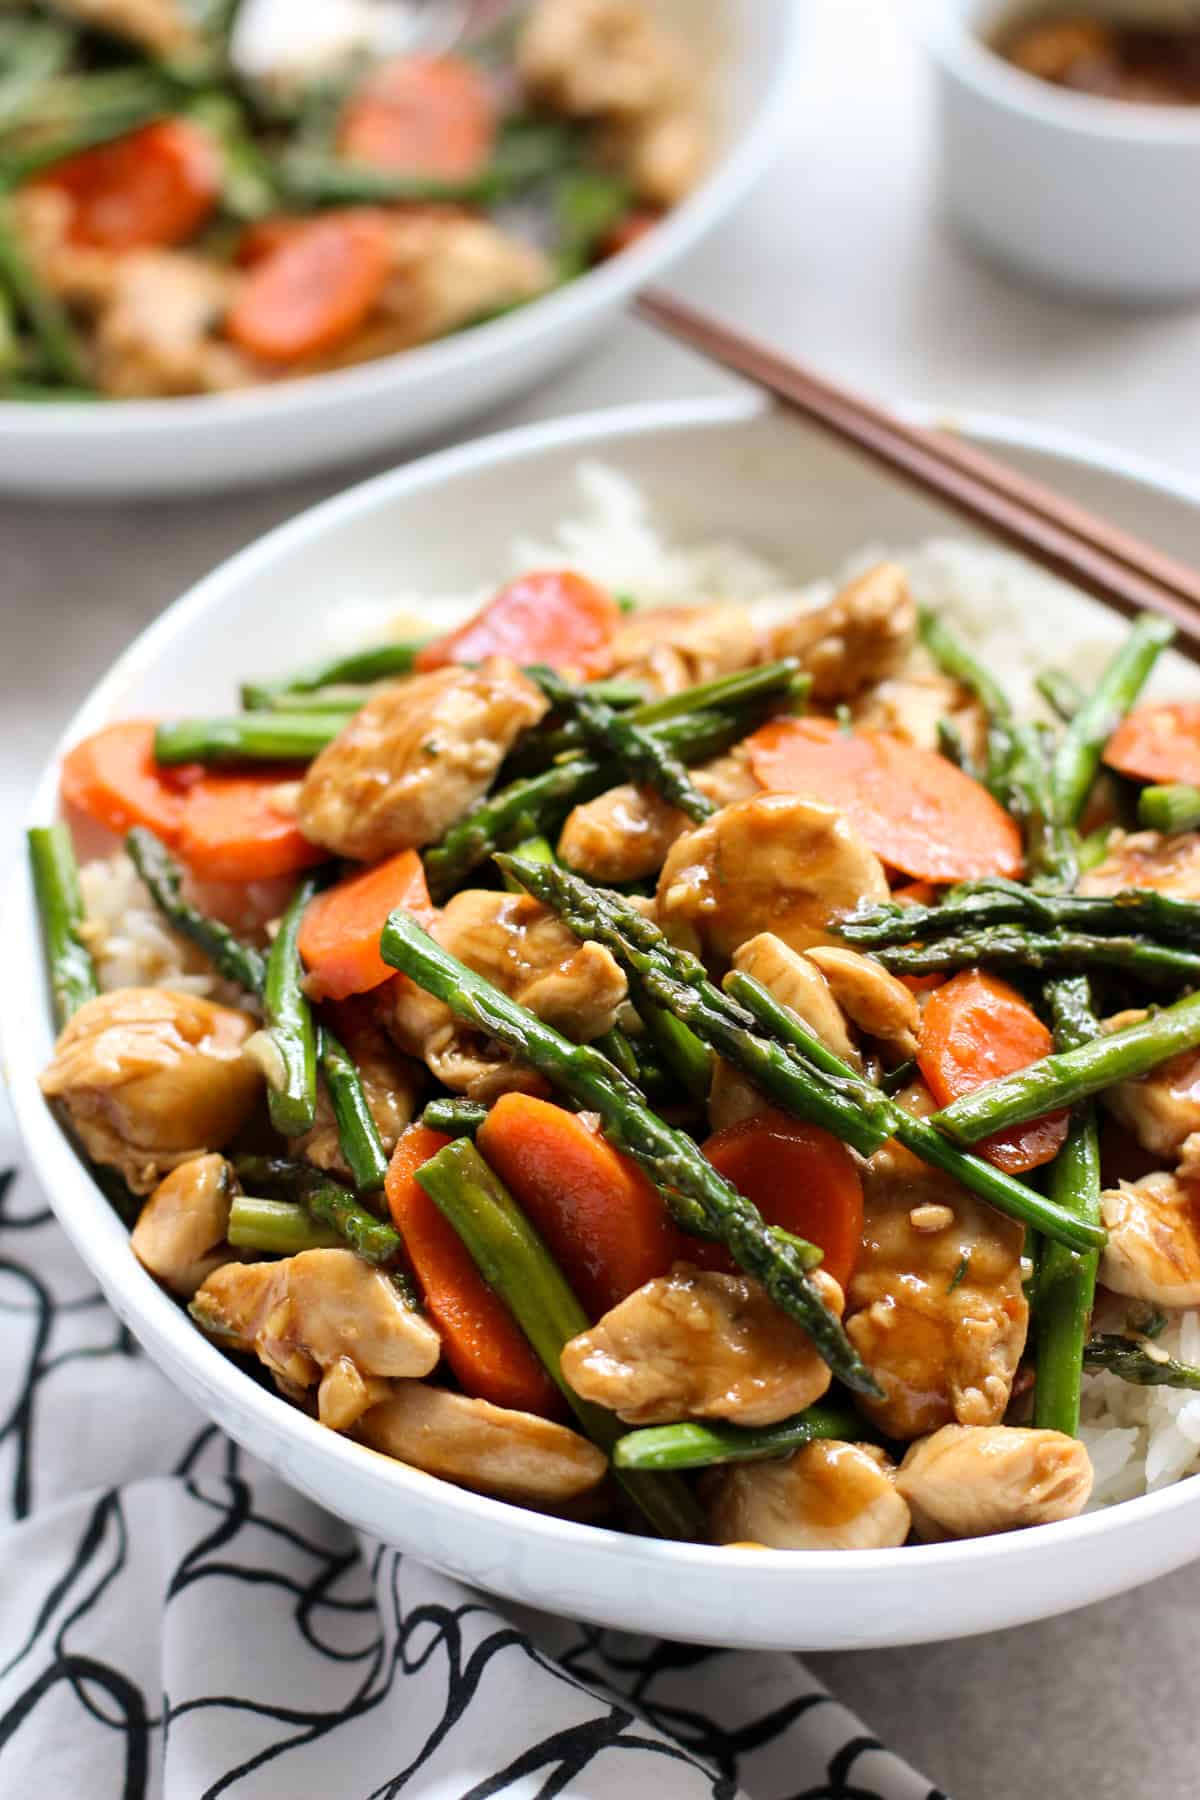 A bowl of Chicken and Asparagus Stir Fry on top of a bed of rice